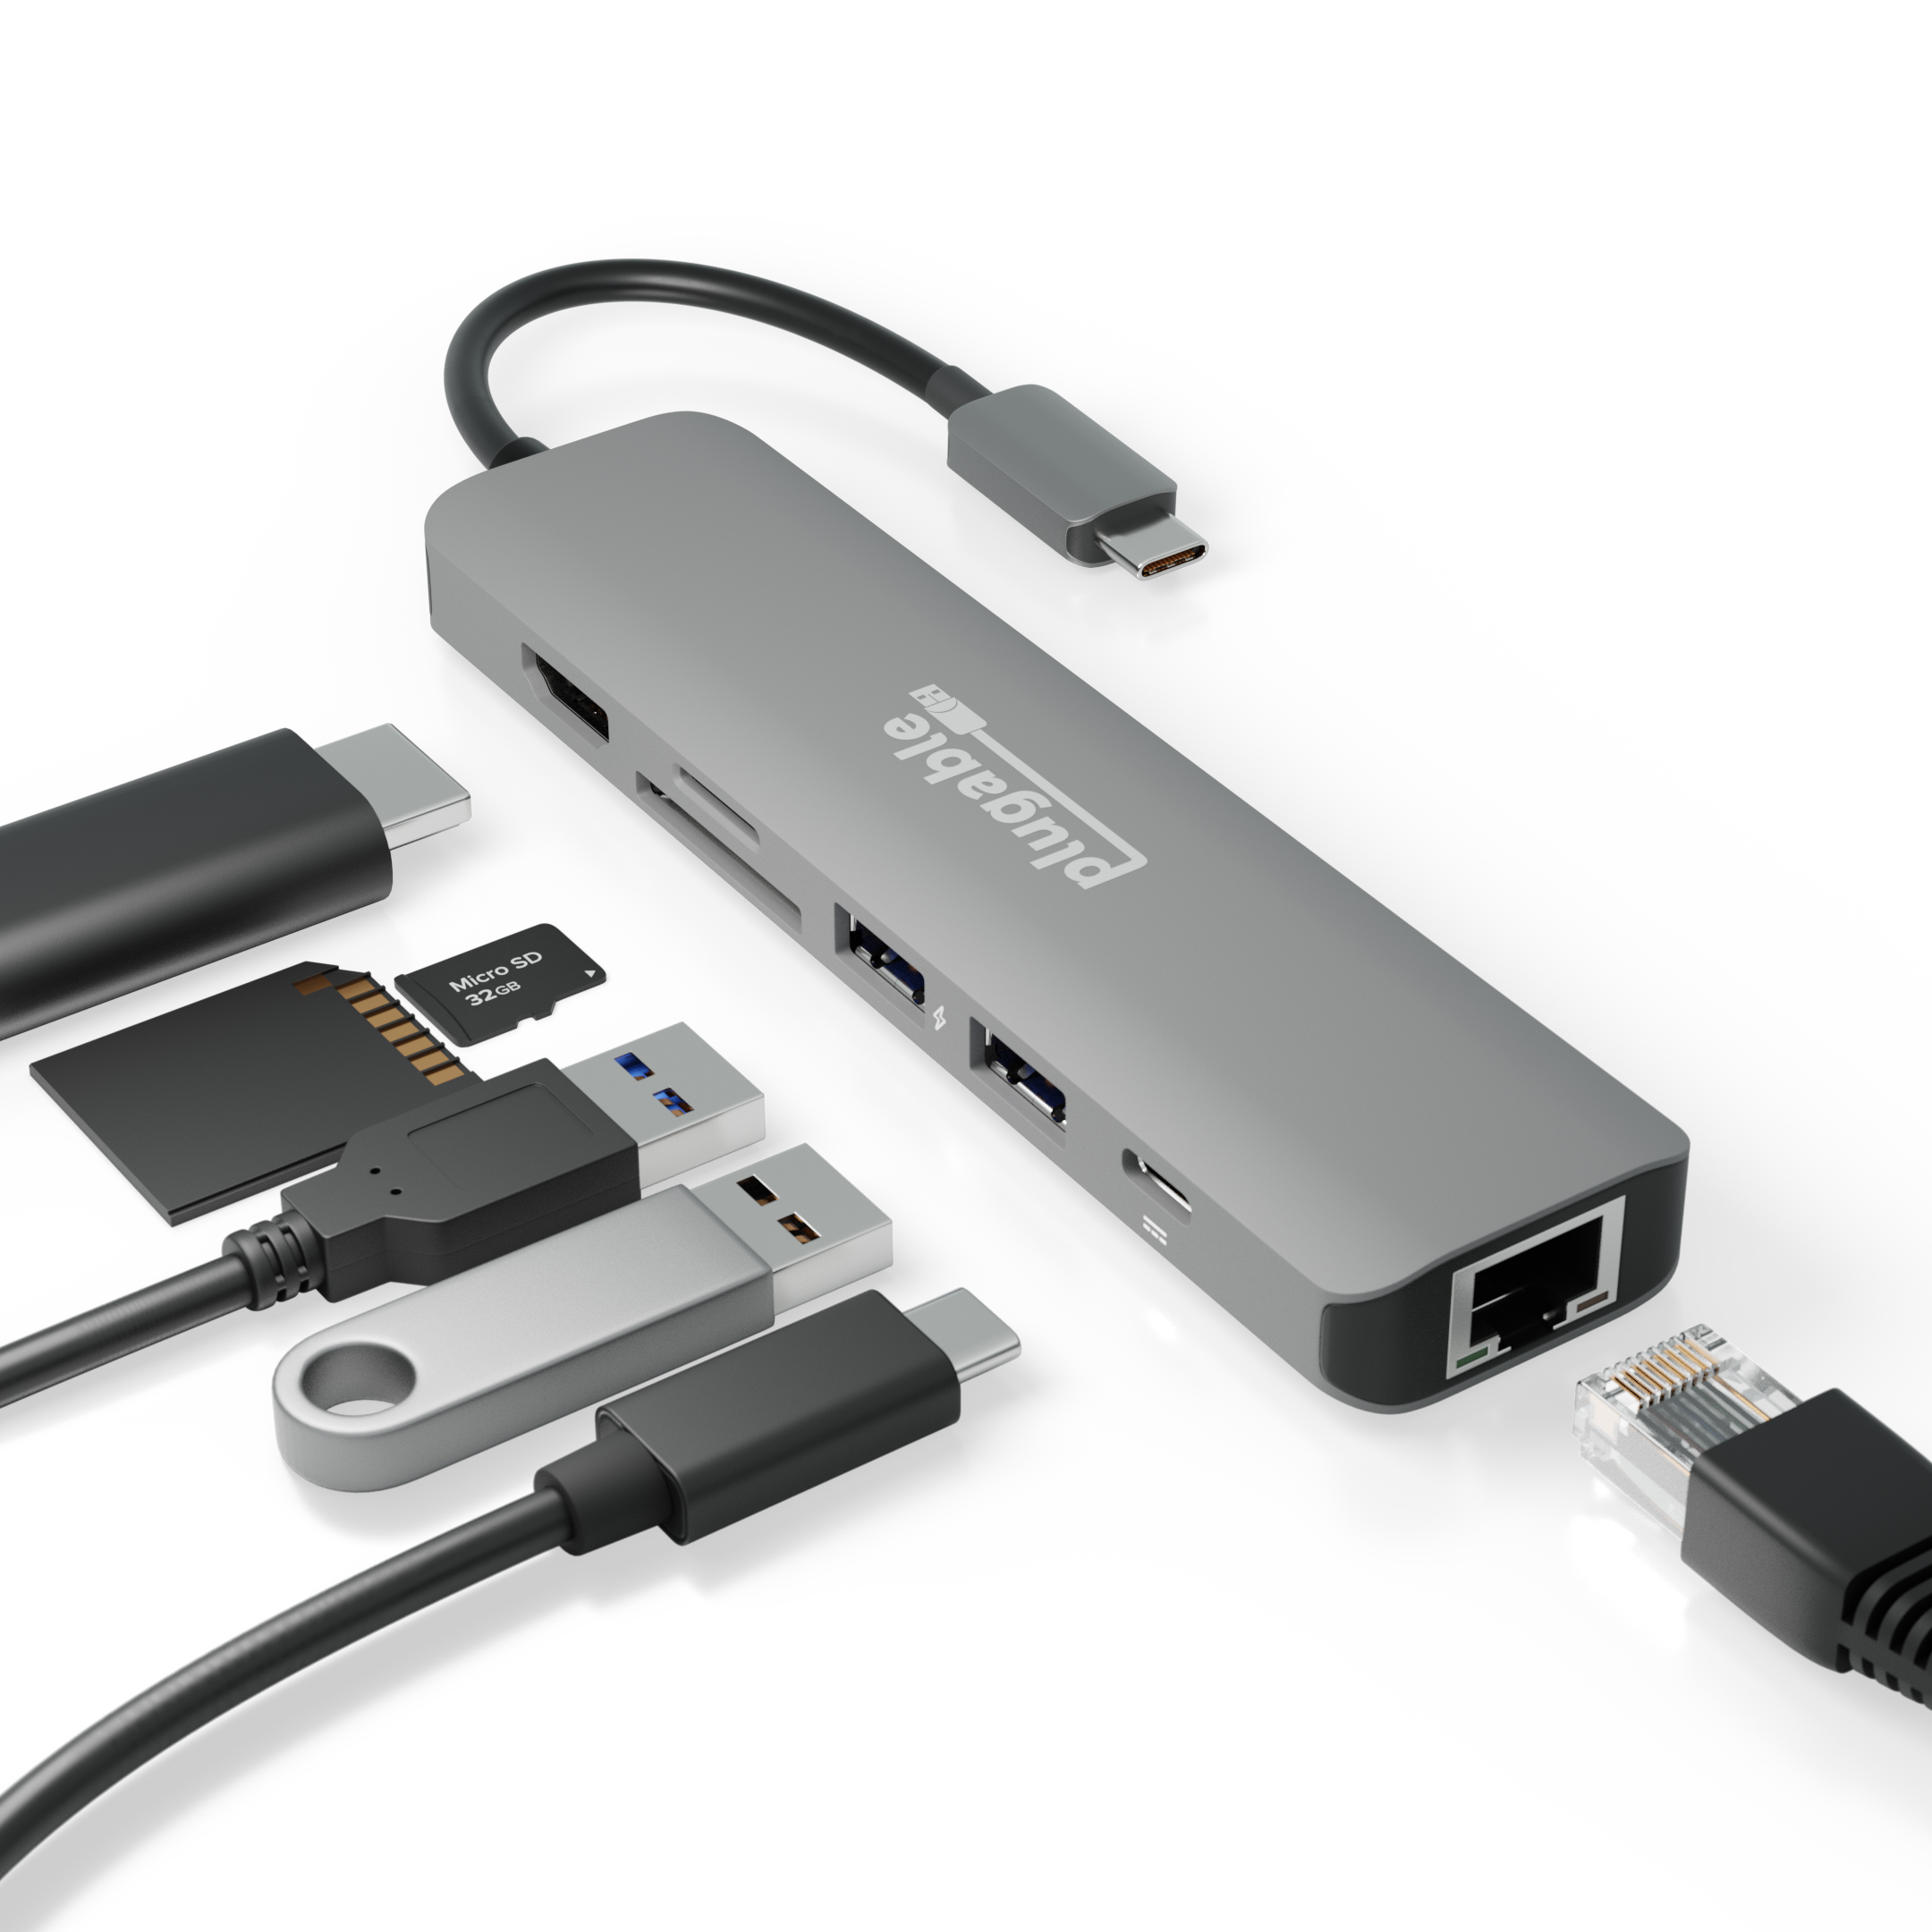 Plugable 7-in-1 USB C Docking Station with Ethernet - Driverless Compatibility with Mac, Windows, Chromebook, Dell XPS and Thunderbolt (100W Charging, Gigabit Ethernet, 4K HDMI, 2x USB, SD/microSD) - image 1 of 8